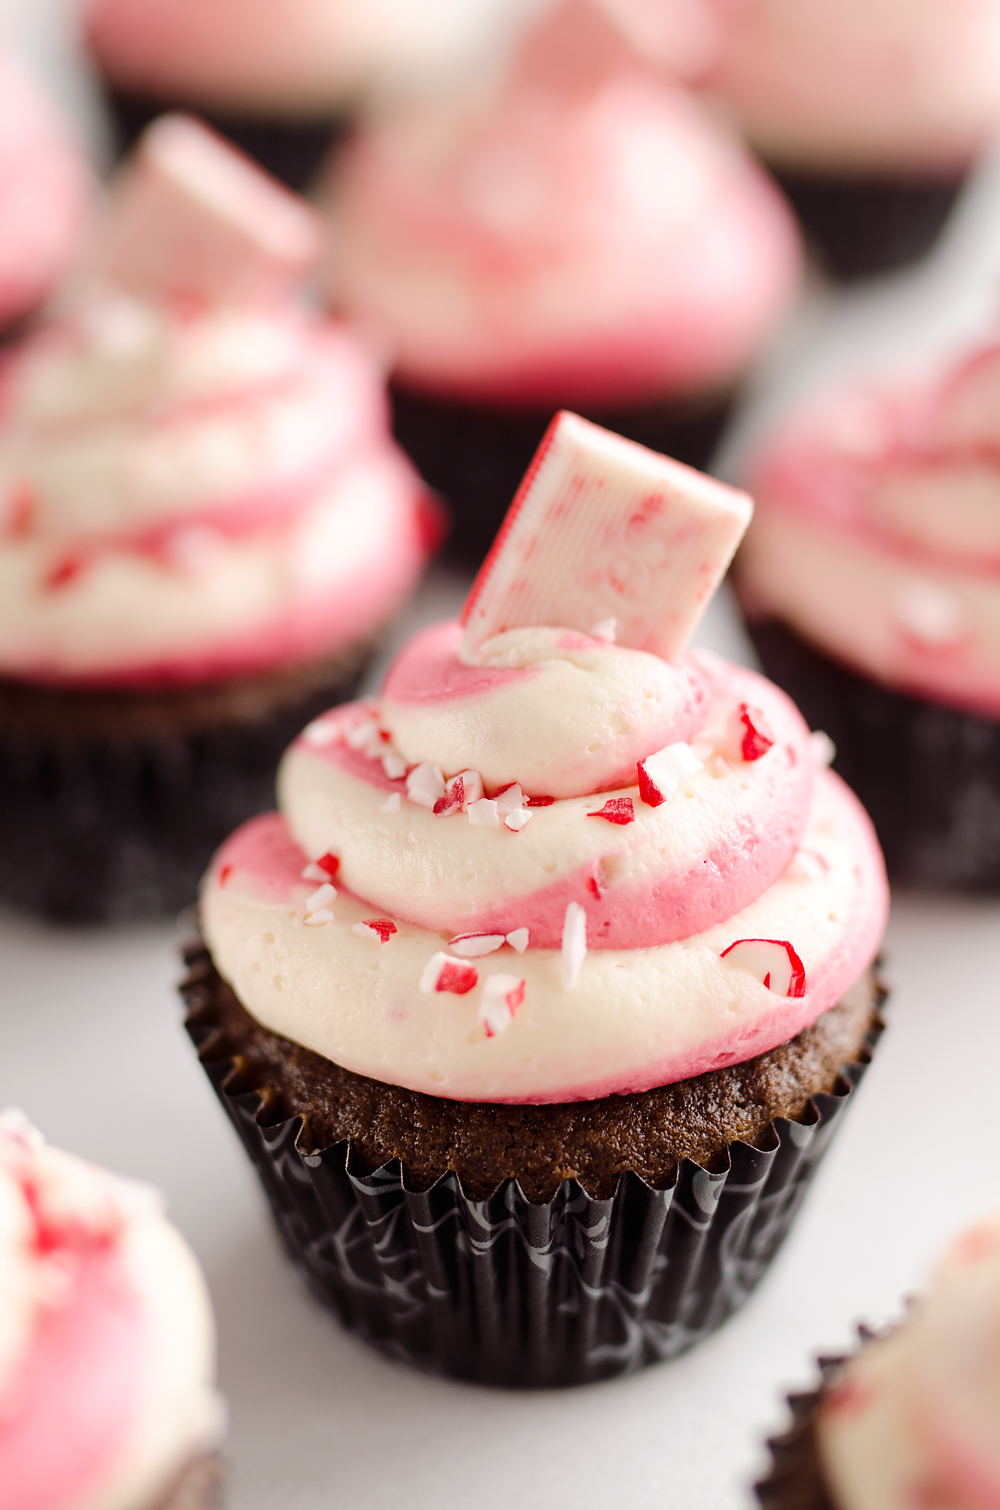 Peppermint Chocolate Candy Cane Cupcakes are a beautifully festive dessert perfect for the holidays! Moist homemade chocolate cupcakes are topped with a candy cane swirl of buttercream and topped with peppermint for a seasonal treat. 